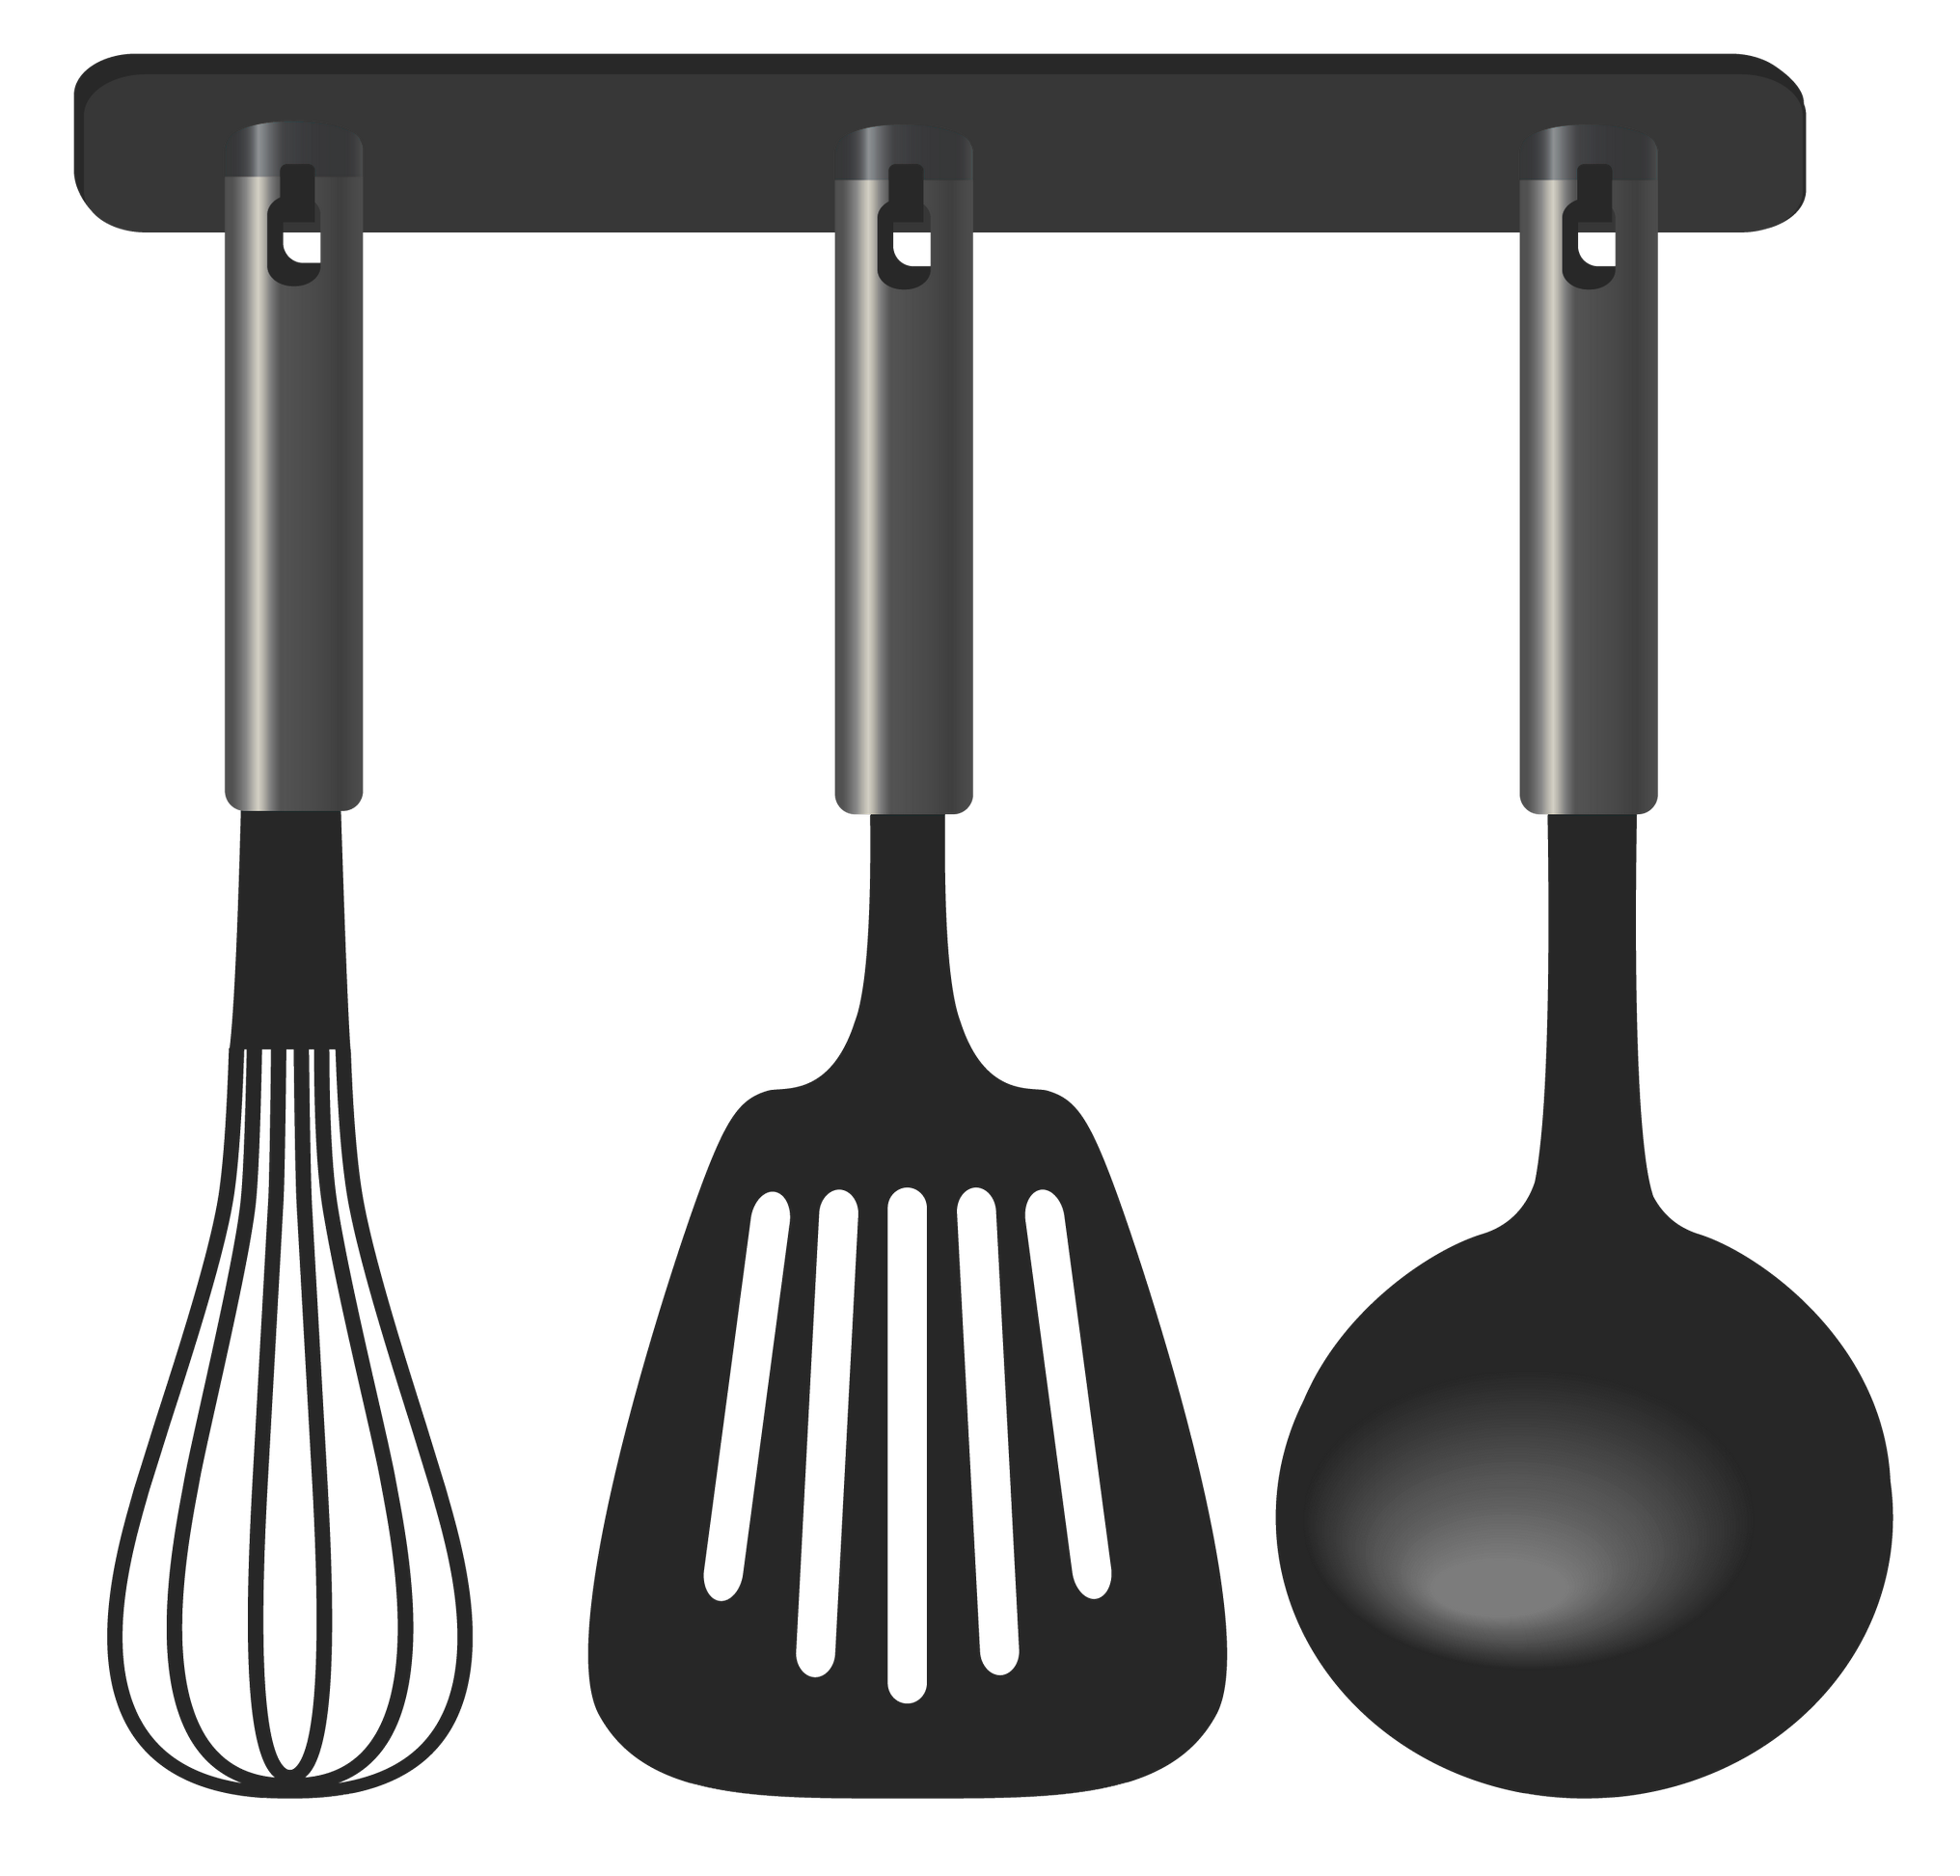 clipart of kitchen tools - photo #20